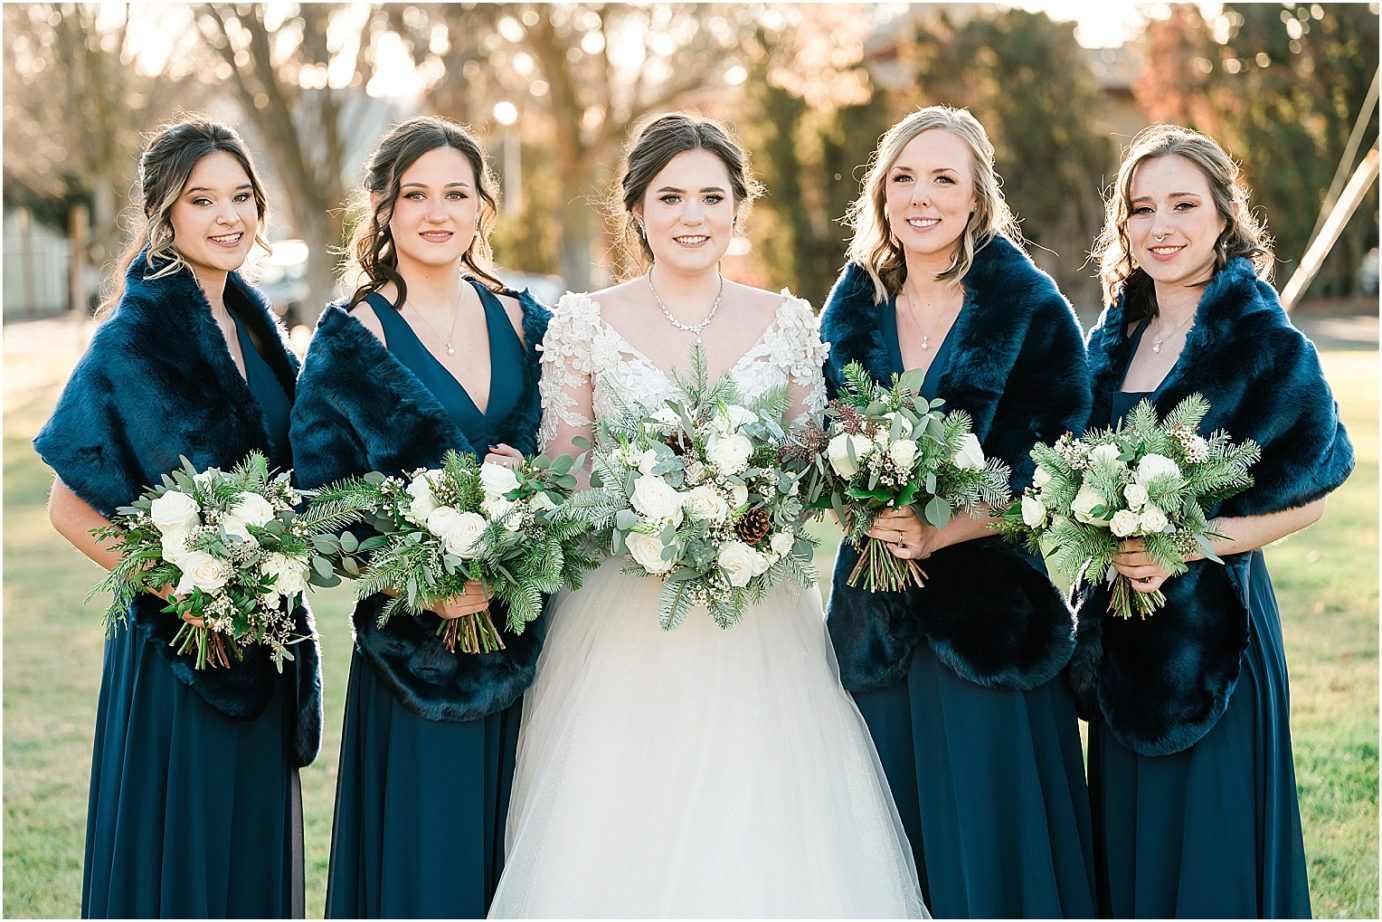 Wedding at The Armory Ellensburg Photographer Andrew and Stella bridal party